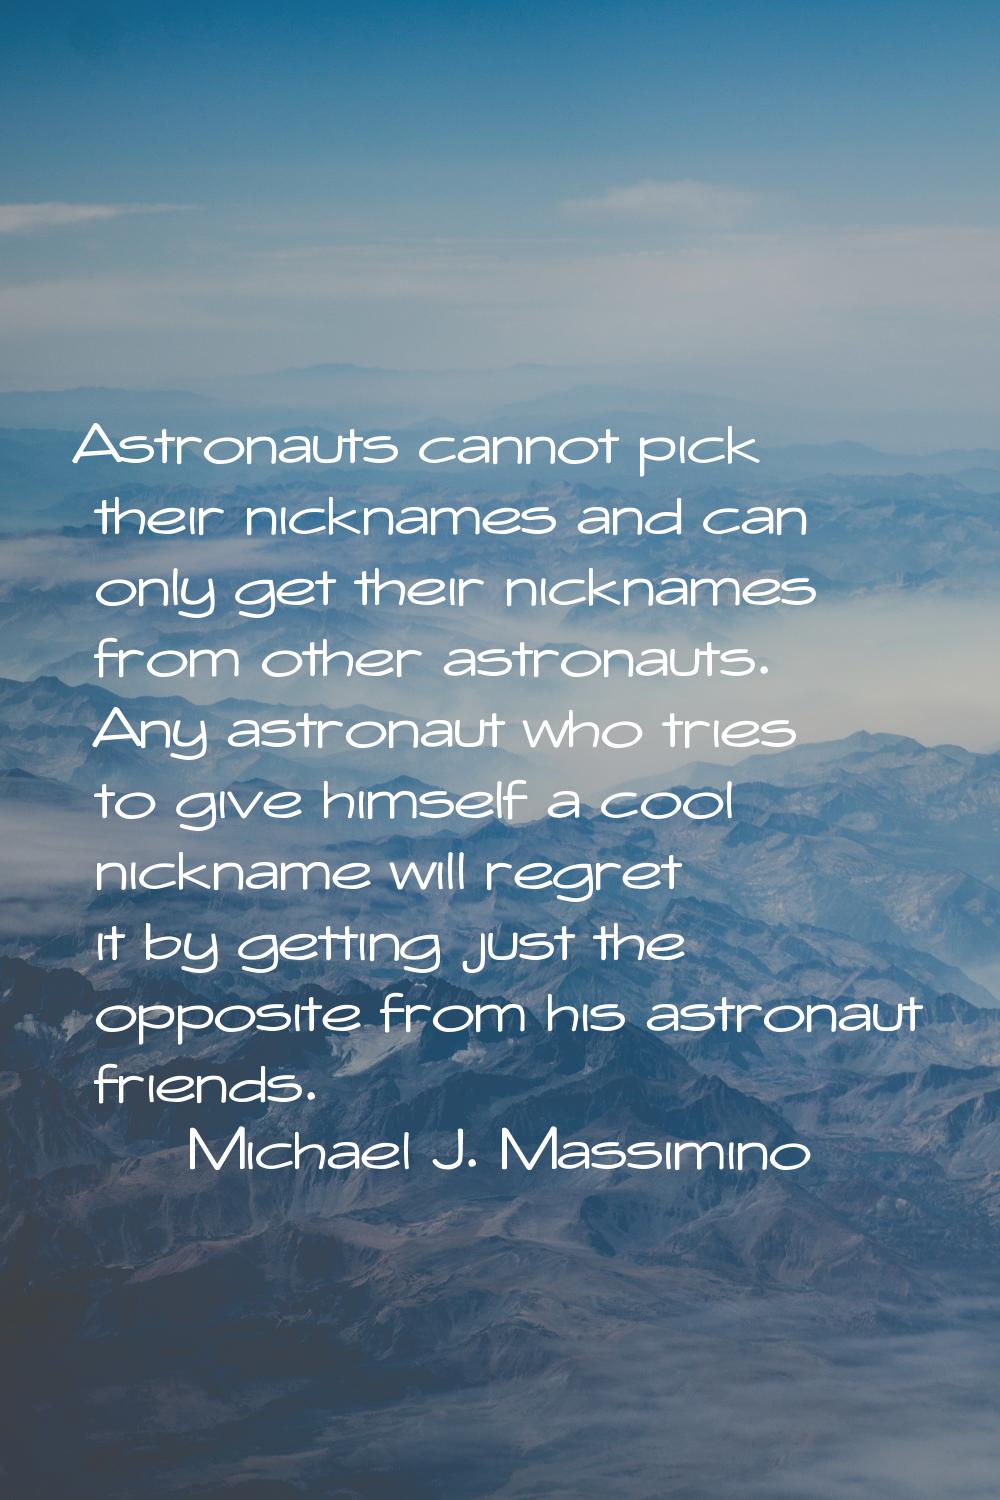 Astronauts cannot pick their nicknames and can only get their nicknames from other astronauts. Any 